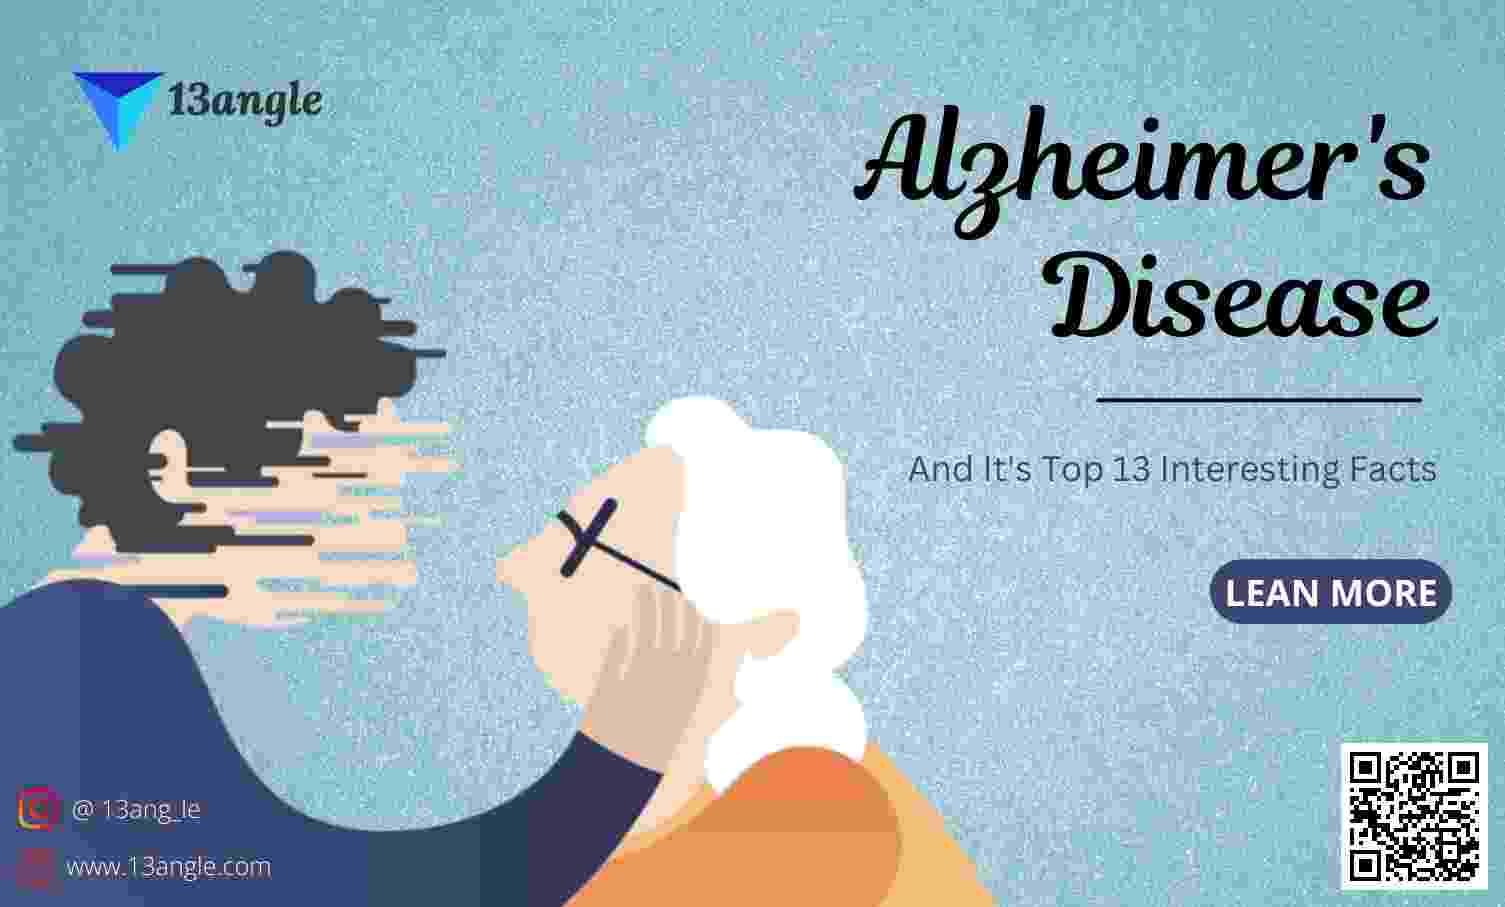 Alzheimer's Disease And It's Top 13 Interesting Facts- 13angle.com